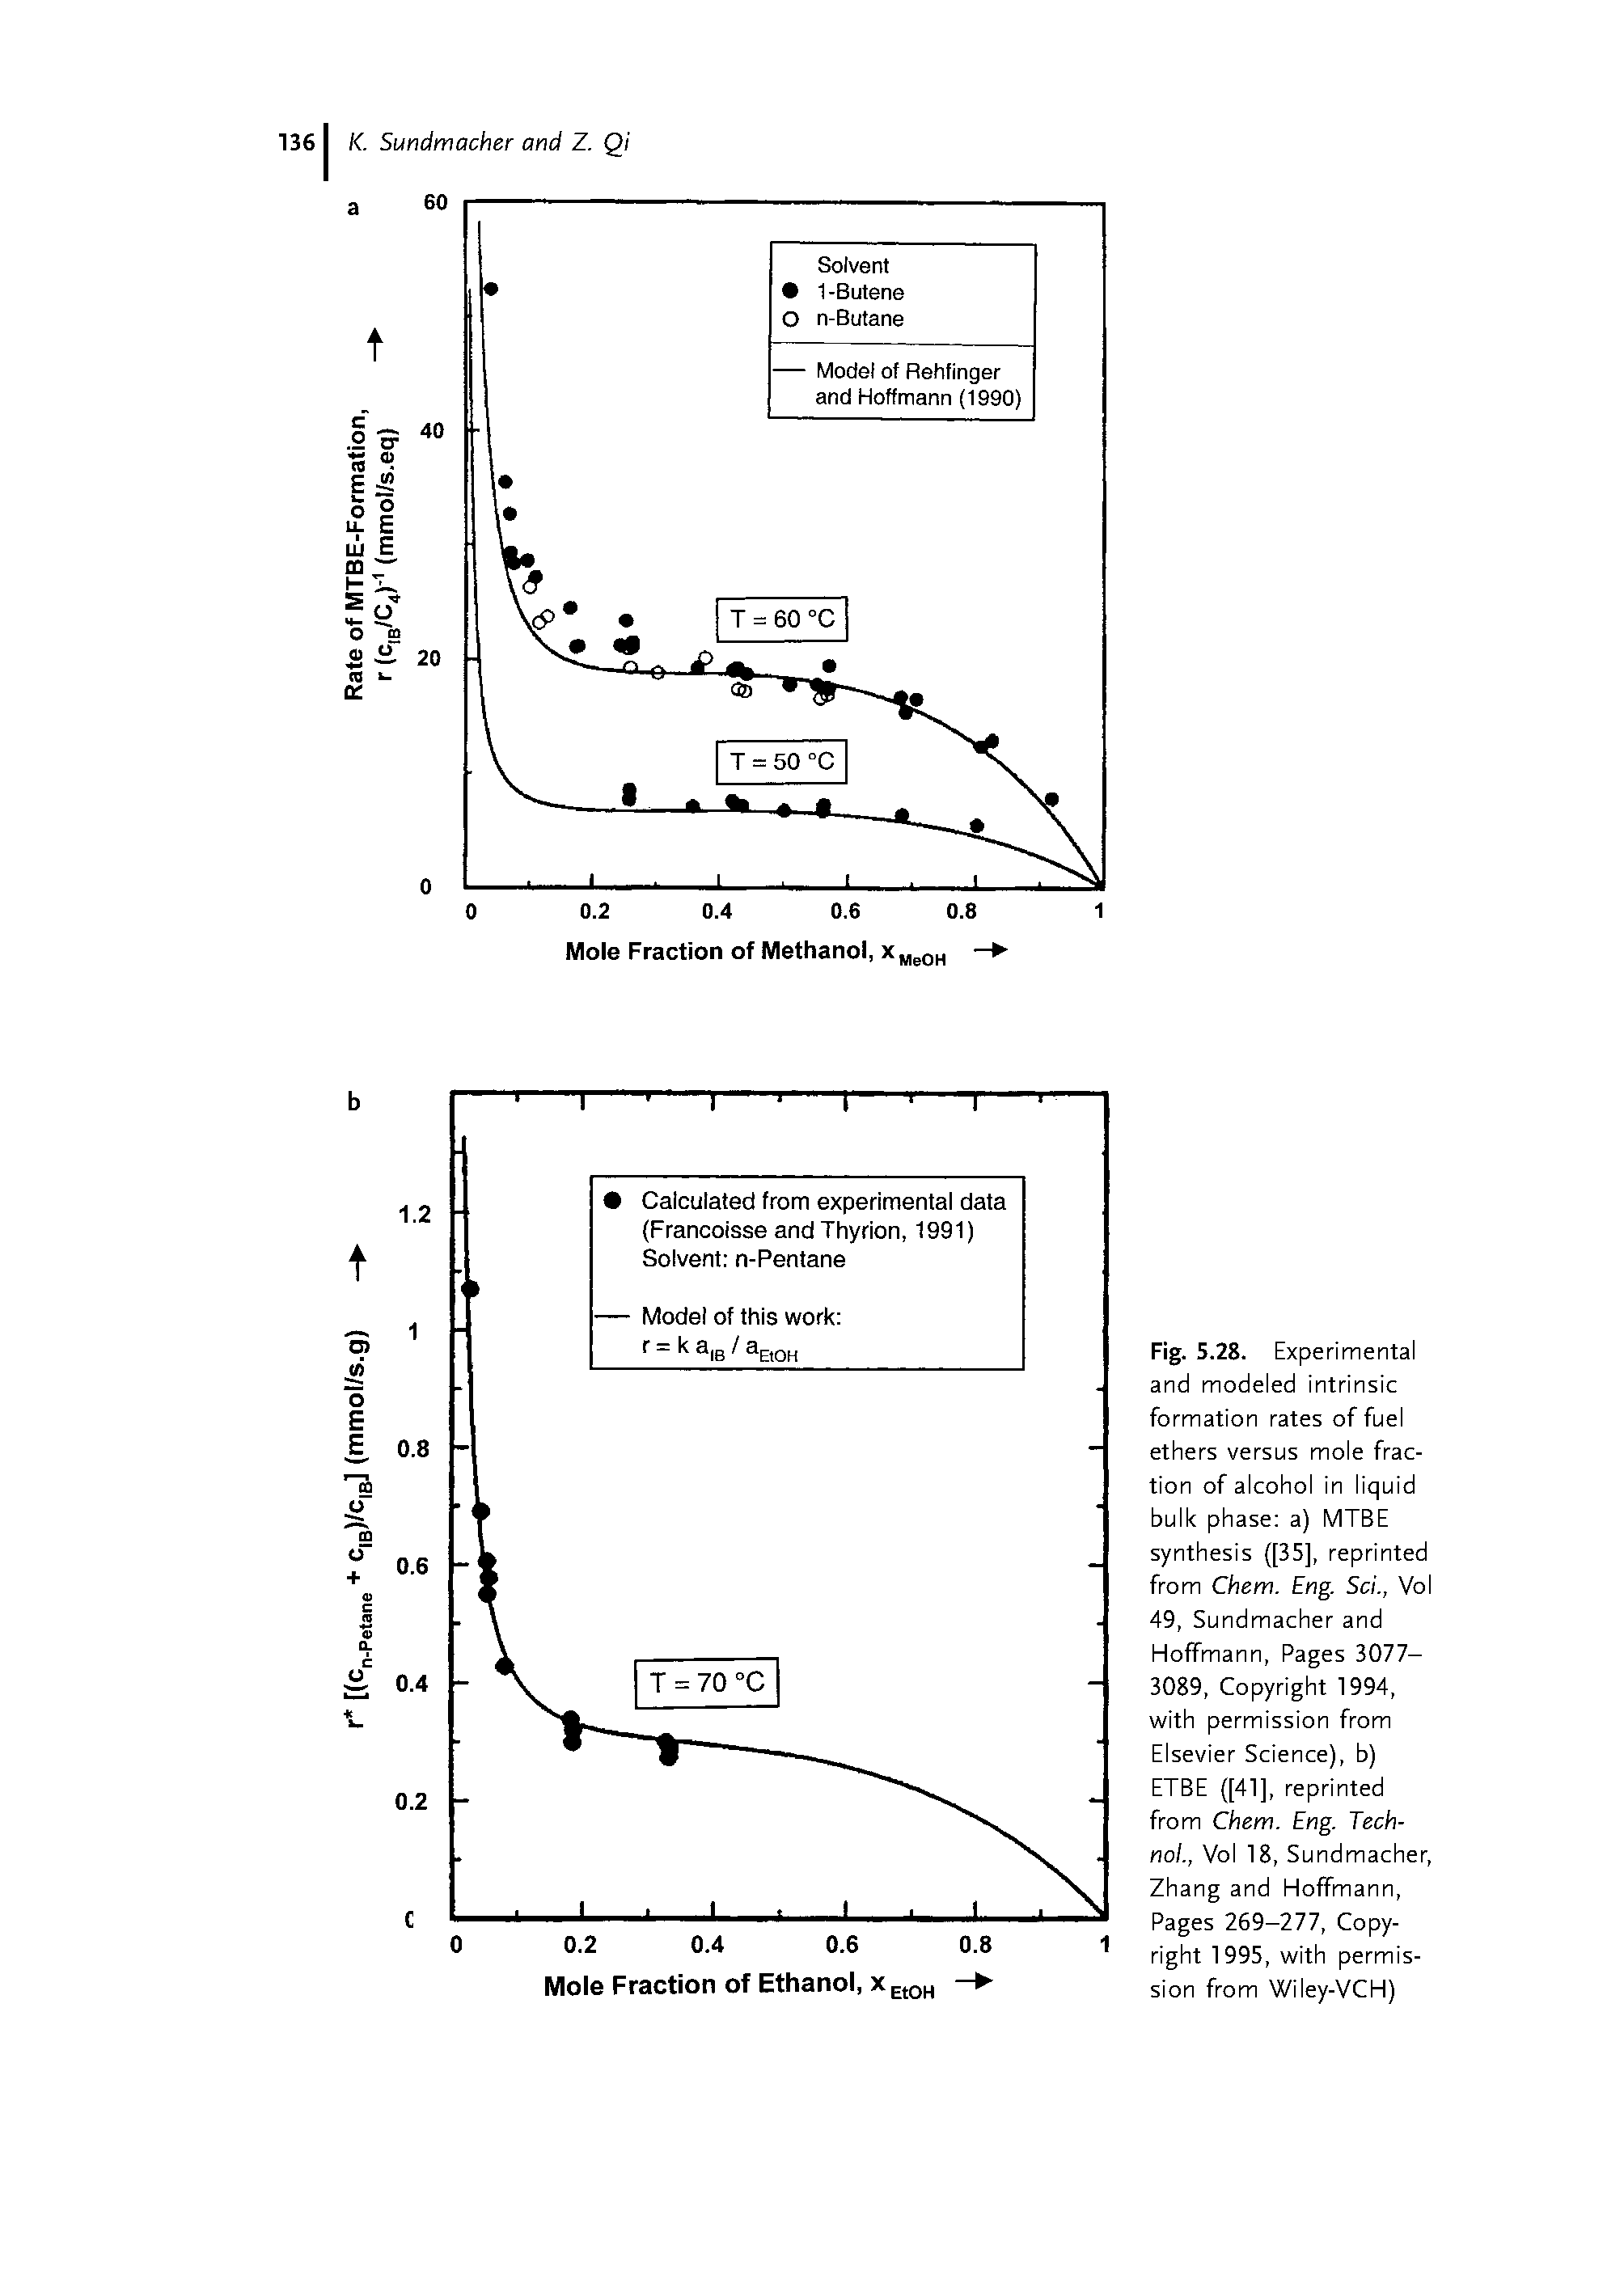 Fig. 5.28. Experimental and modeled intrinsic formation rates of fuel ethers versus mole fraction of alcohol in liquid bulk phase a) MTBE synthesis ([35], reprinted from Chem. Eng. Sci., Vo I 49, Sundmacher and Hoffmann, Pages 3077-3089, Copyright 1994, with permission from Elsevier Science), b)...